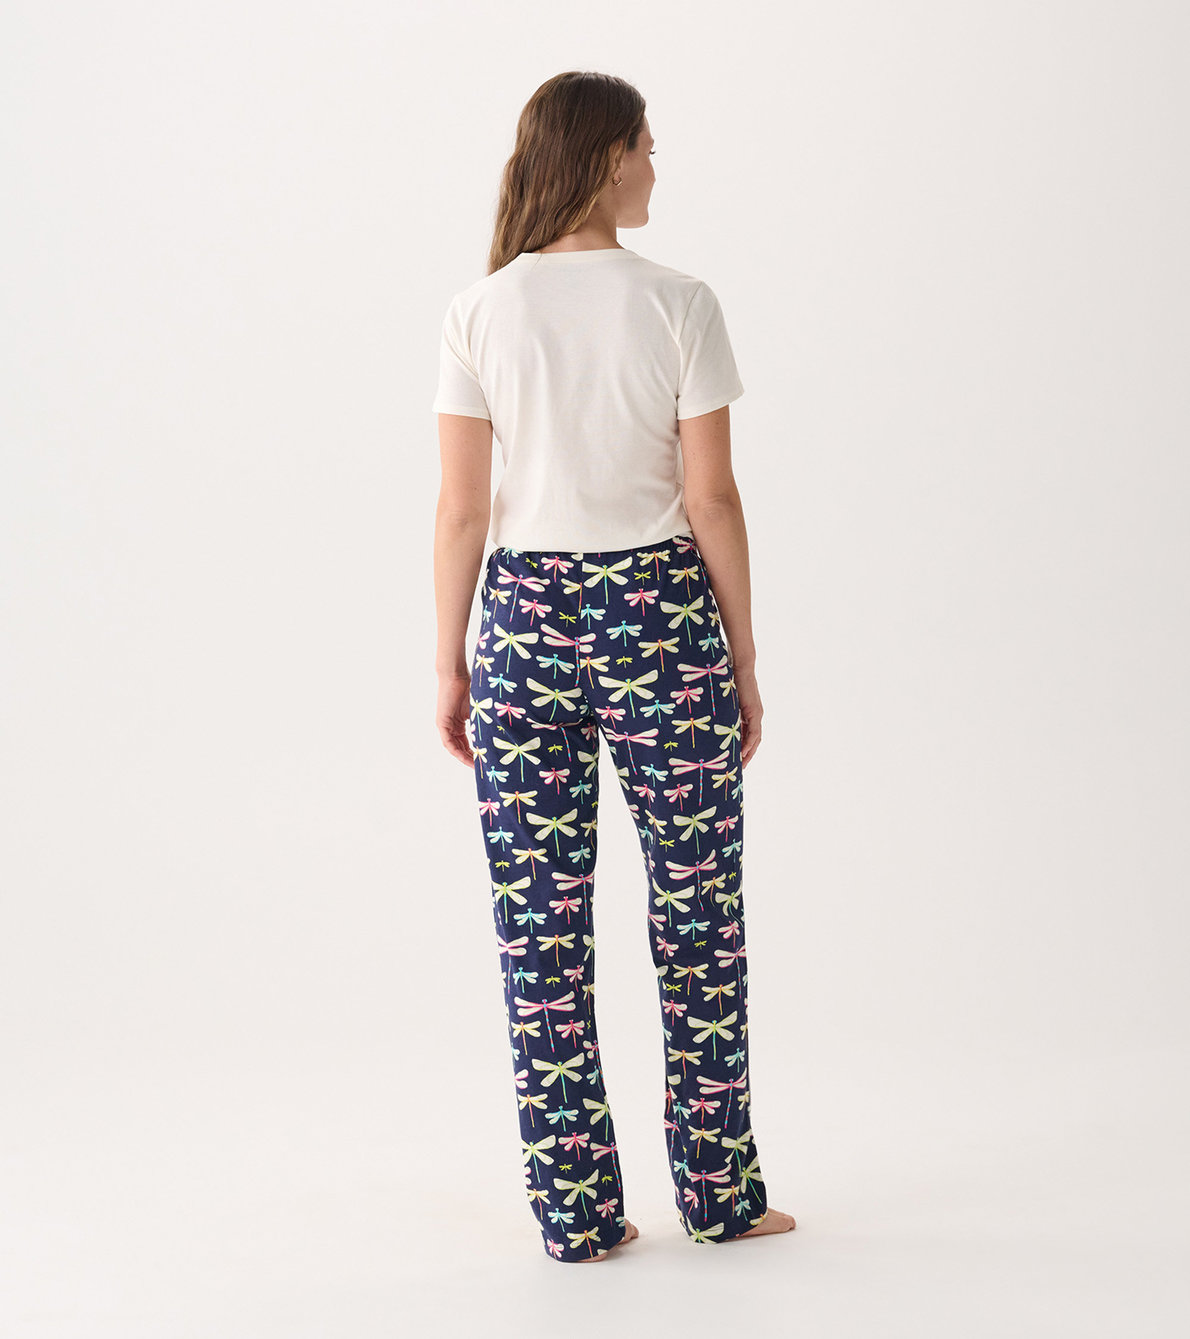 View larger image of Women's Dragon Fly T-Shirt and Pants Pajama Separates